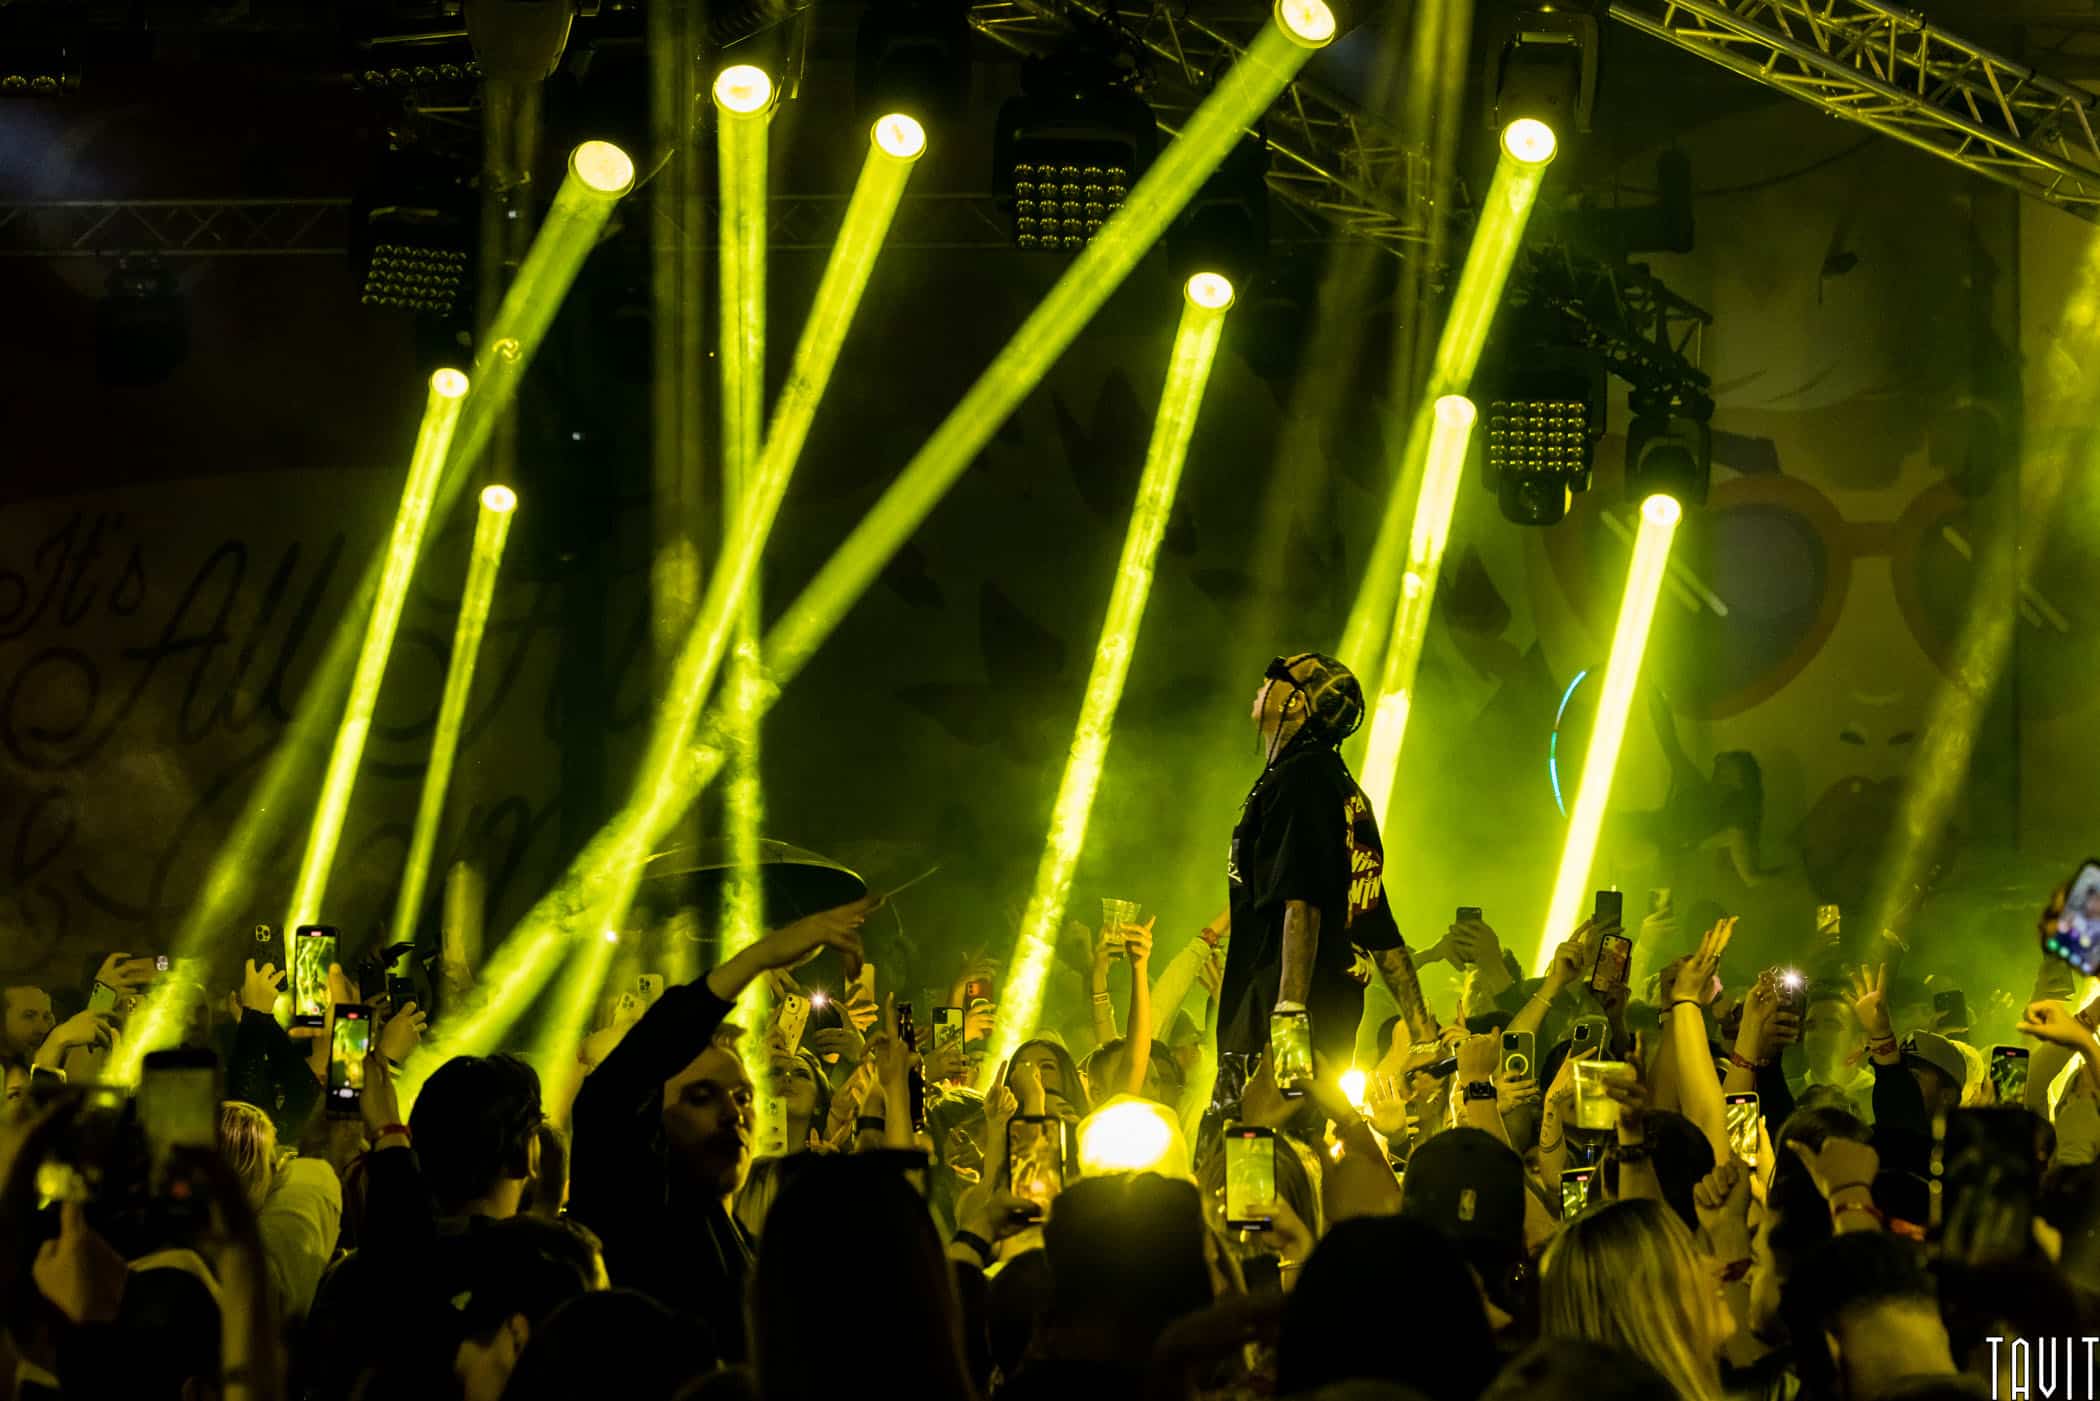  ASAP Rocky on stage with yellow lights